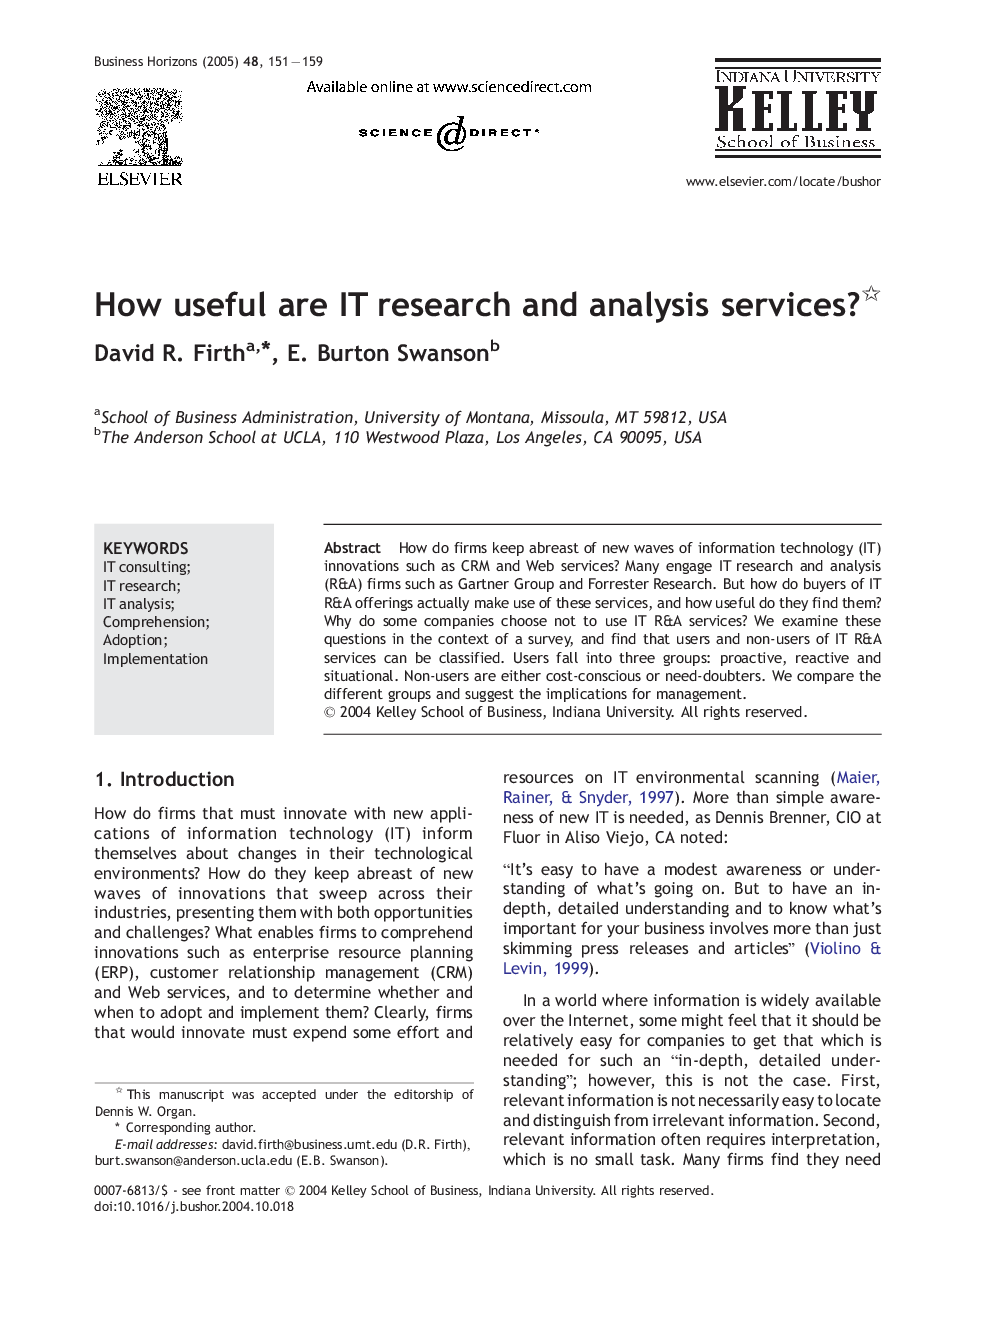 How useful are IT research and analysis services?